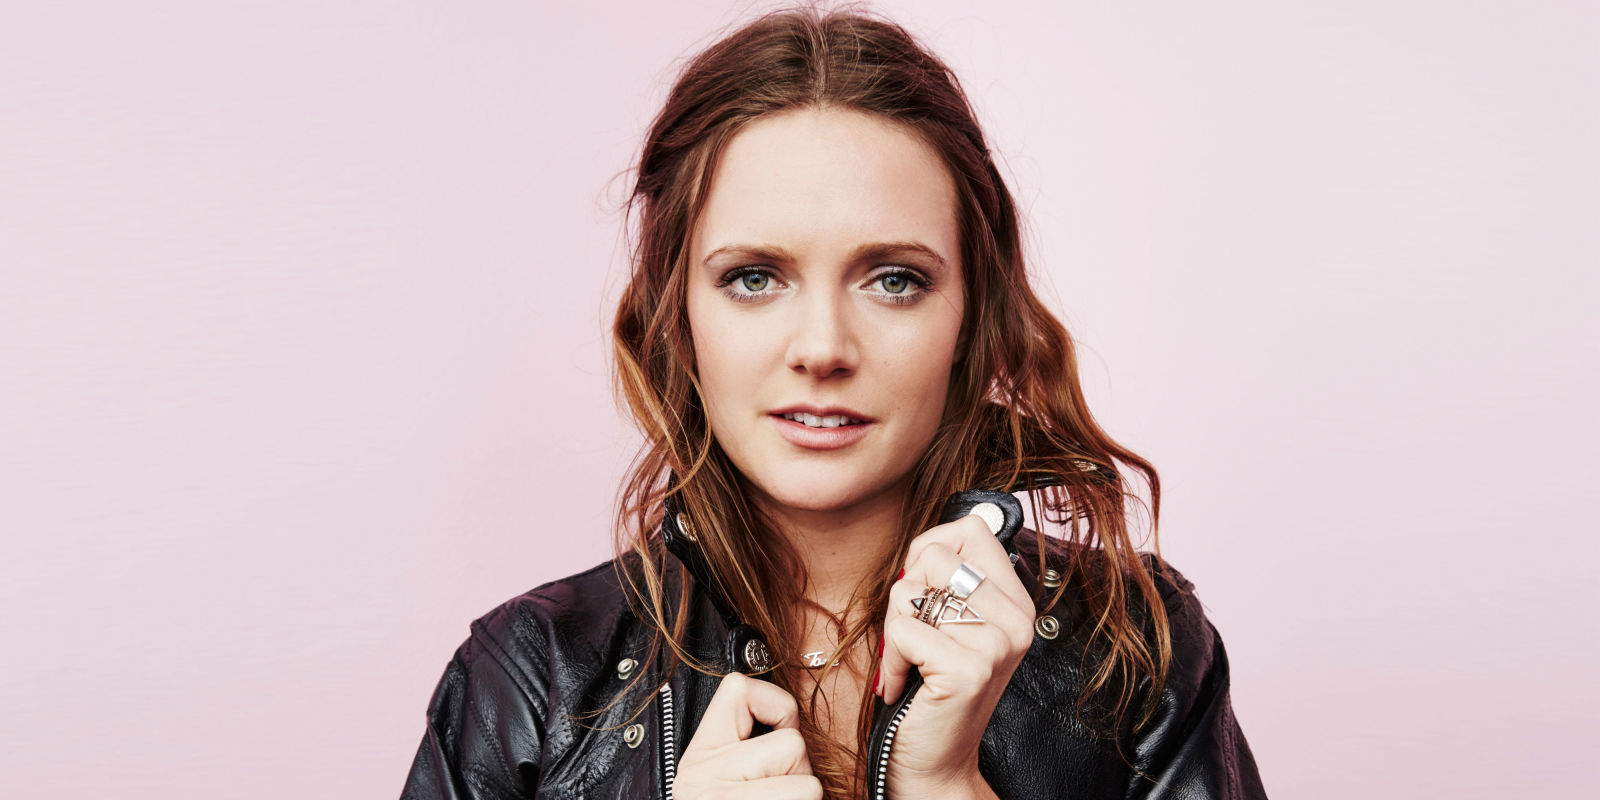 Nice Images Collection: Tove Lo Desktop Wallpapers